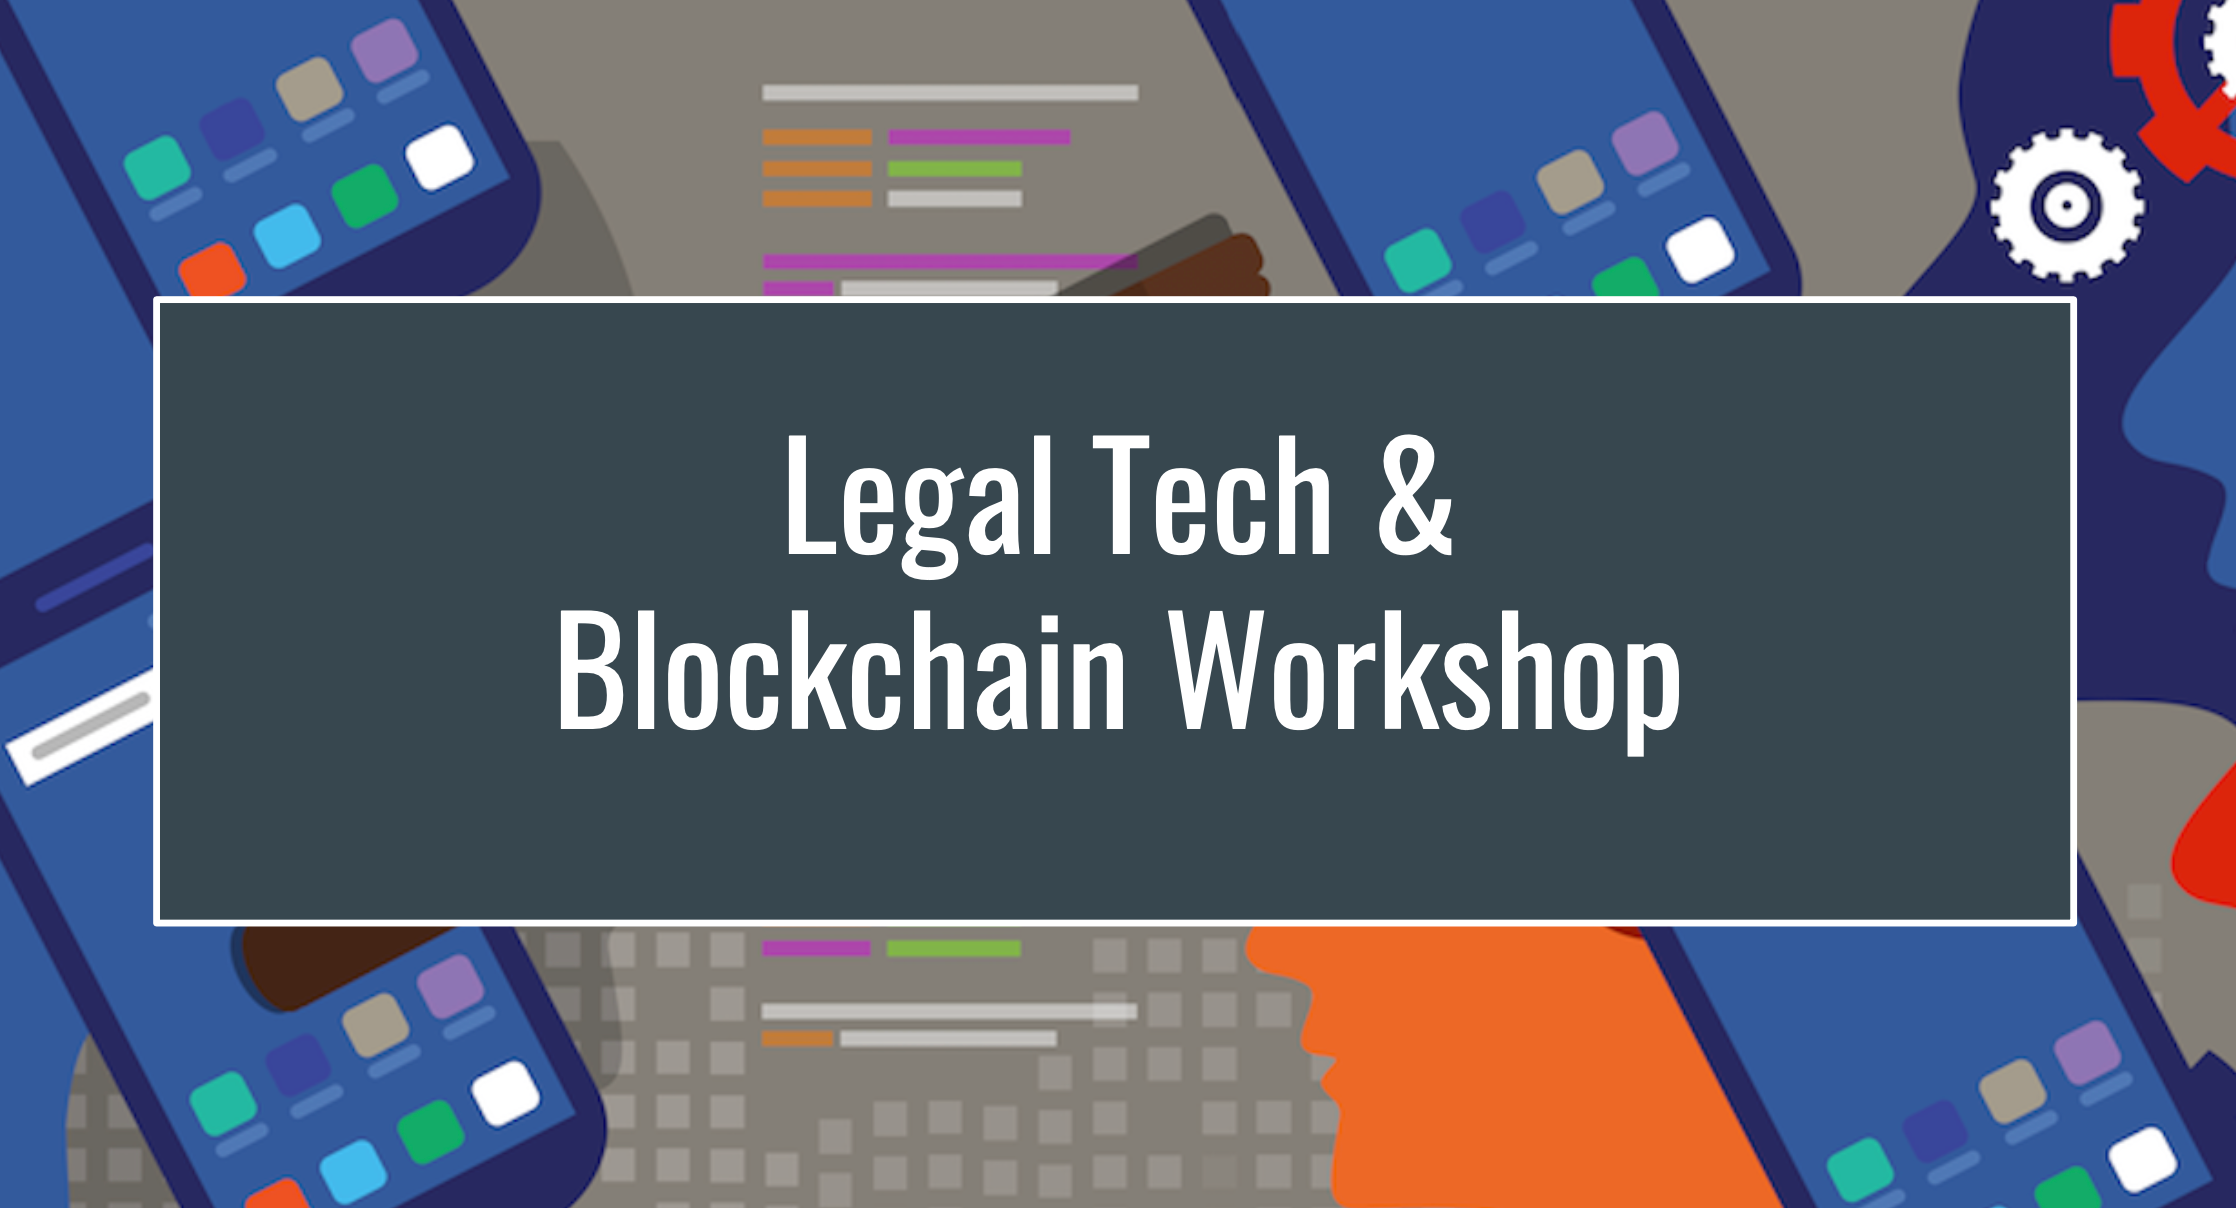 Notes from the Legal Tech & Blockchain Workshop